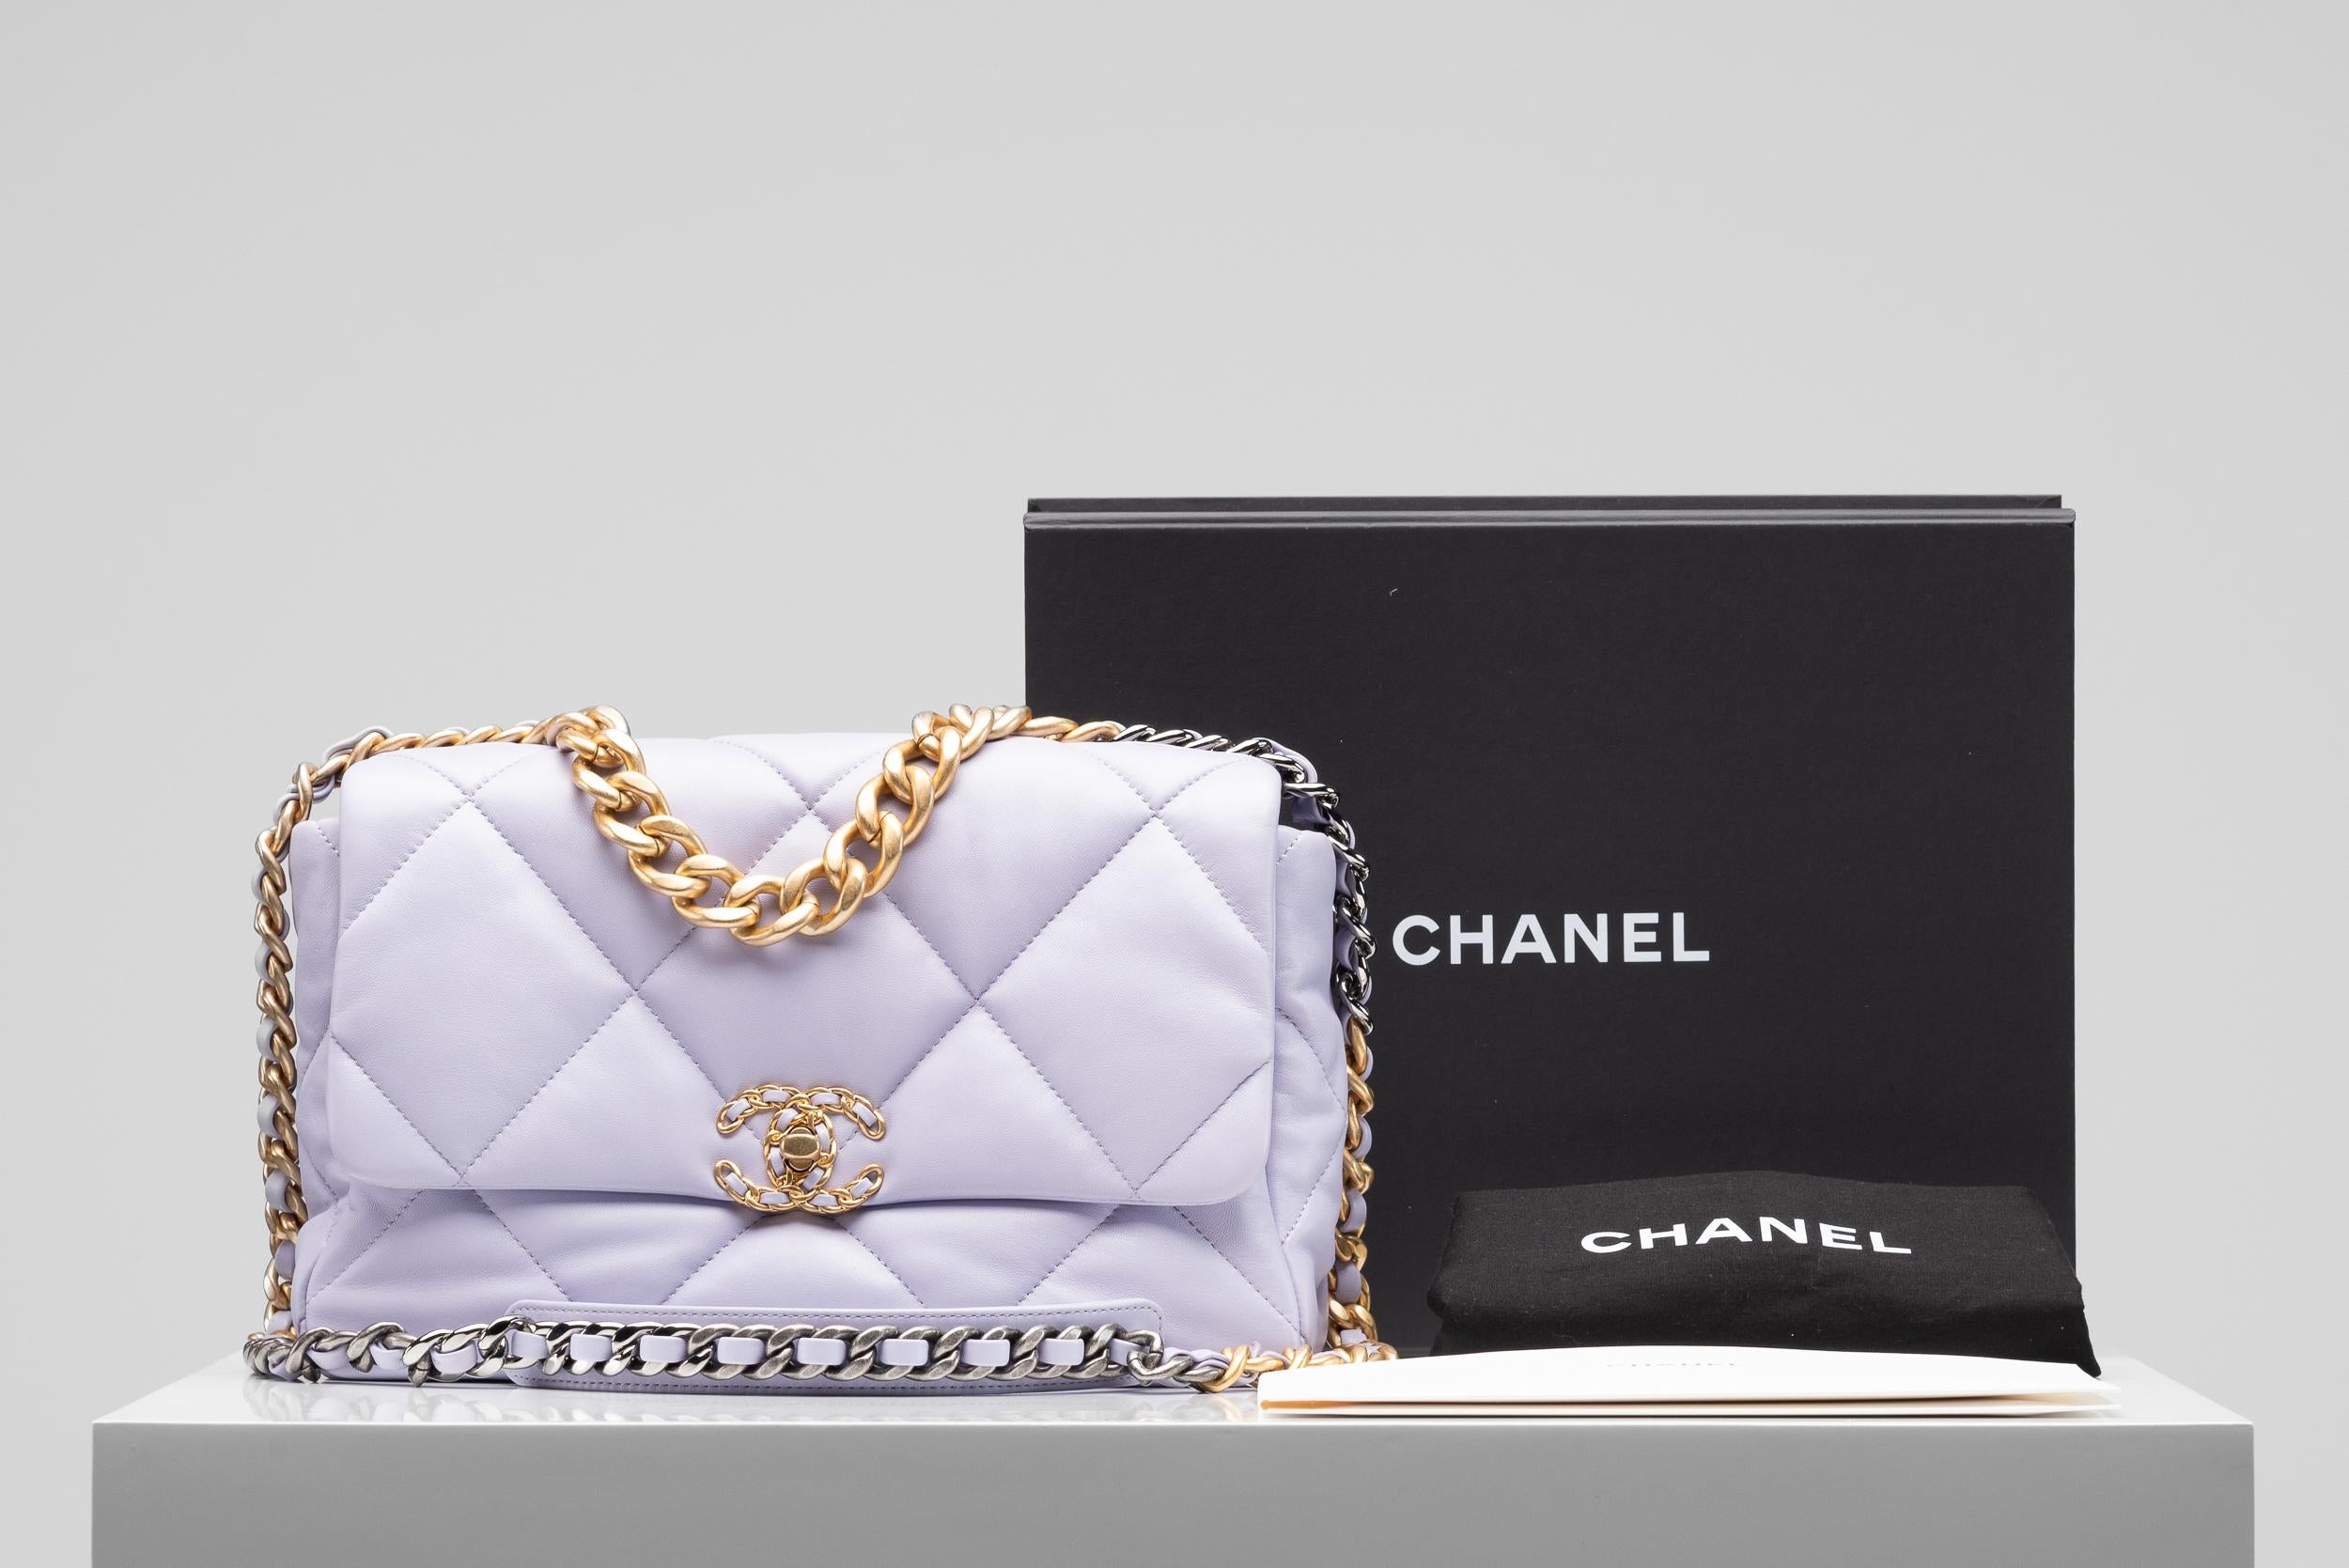 From the collection of SAVINETI we offer this Chanel 19 Flap Bag:
- Brand: Chanel
- Model: 19 Flap Bag Lilac
- Year: 2023
- Condition: NEW (unused)
- Materials: lambskin leather, Gold-Tone, Silver-Tone & Ruthenium-Finish Metal hardware
- Extras: